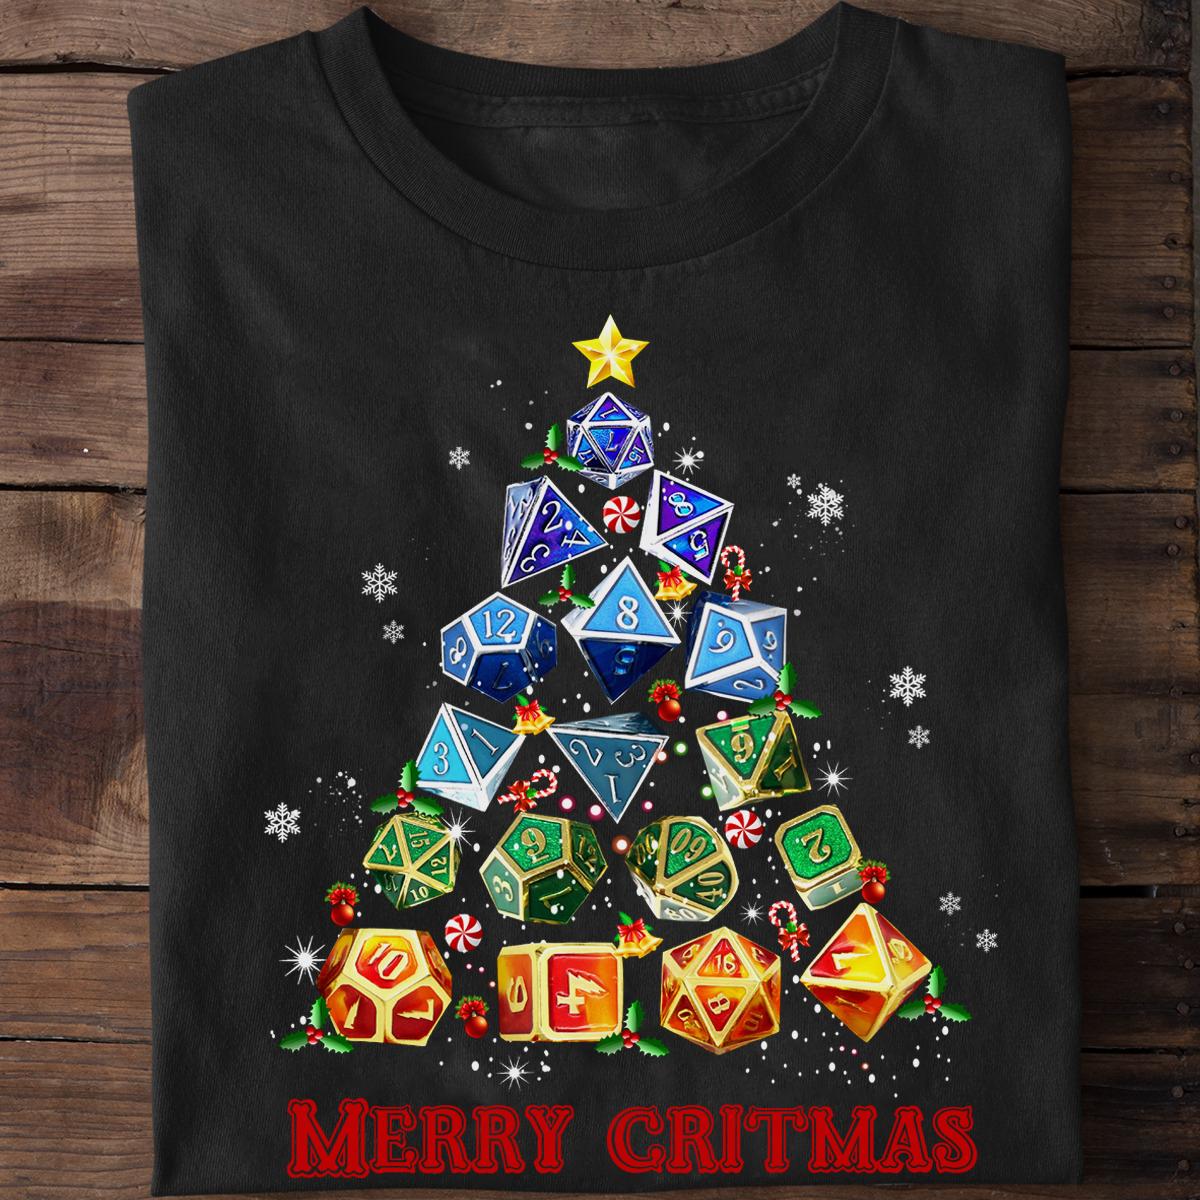 The Dice Dungeon Christmas Tree - Merry Critmas